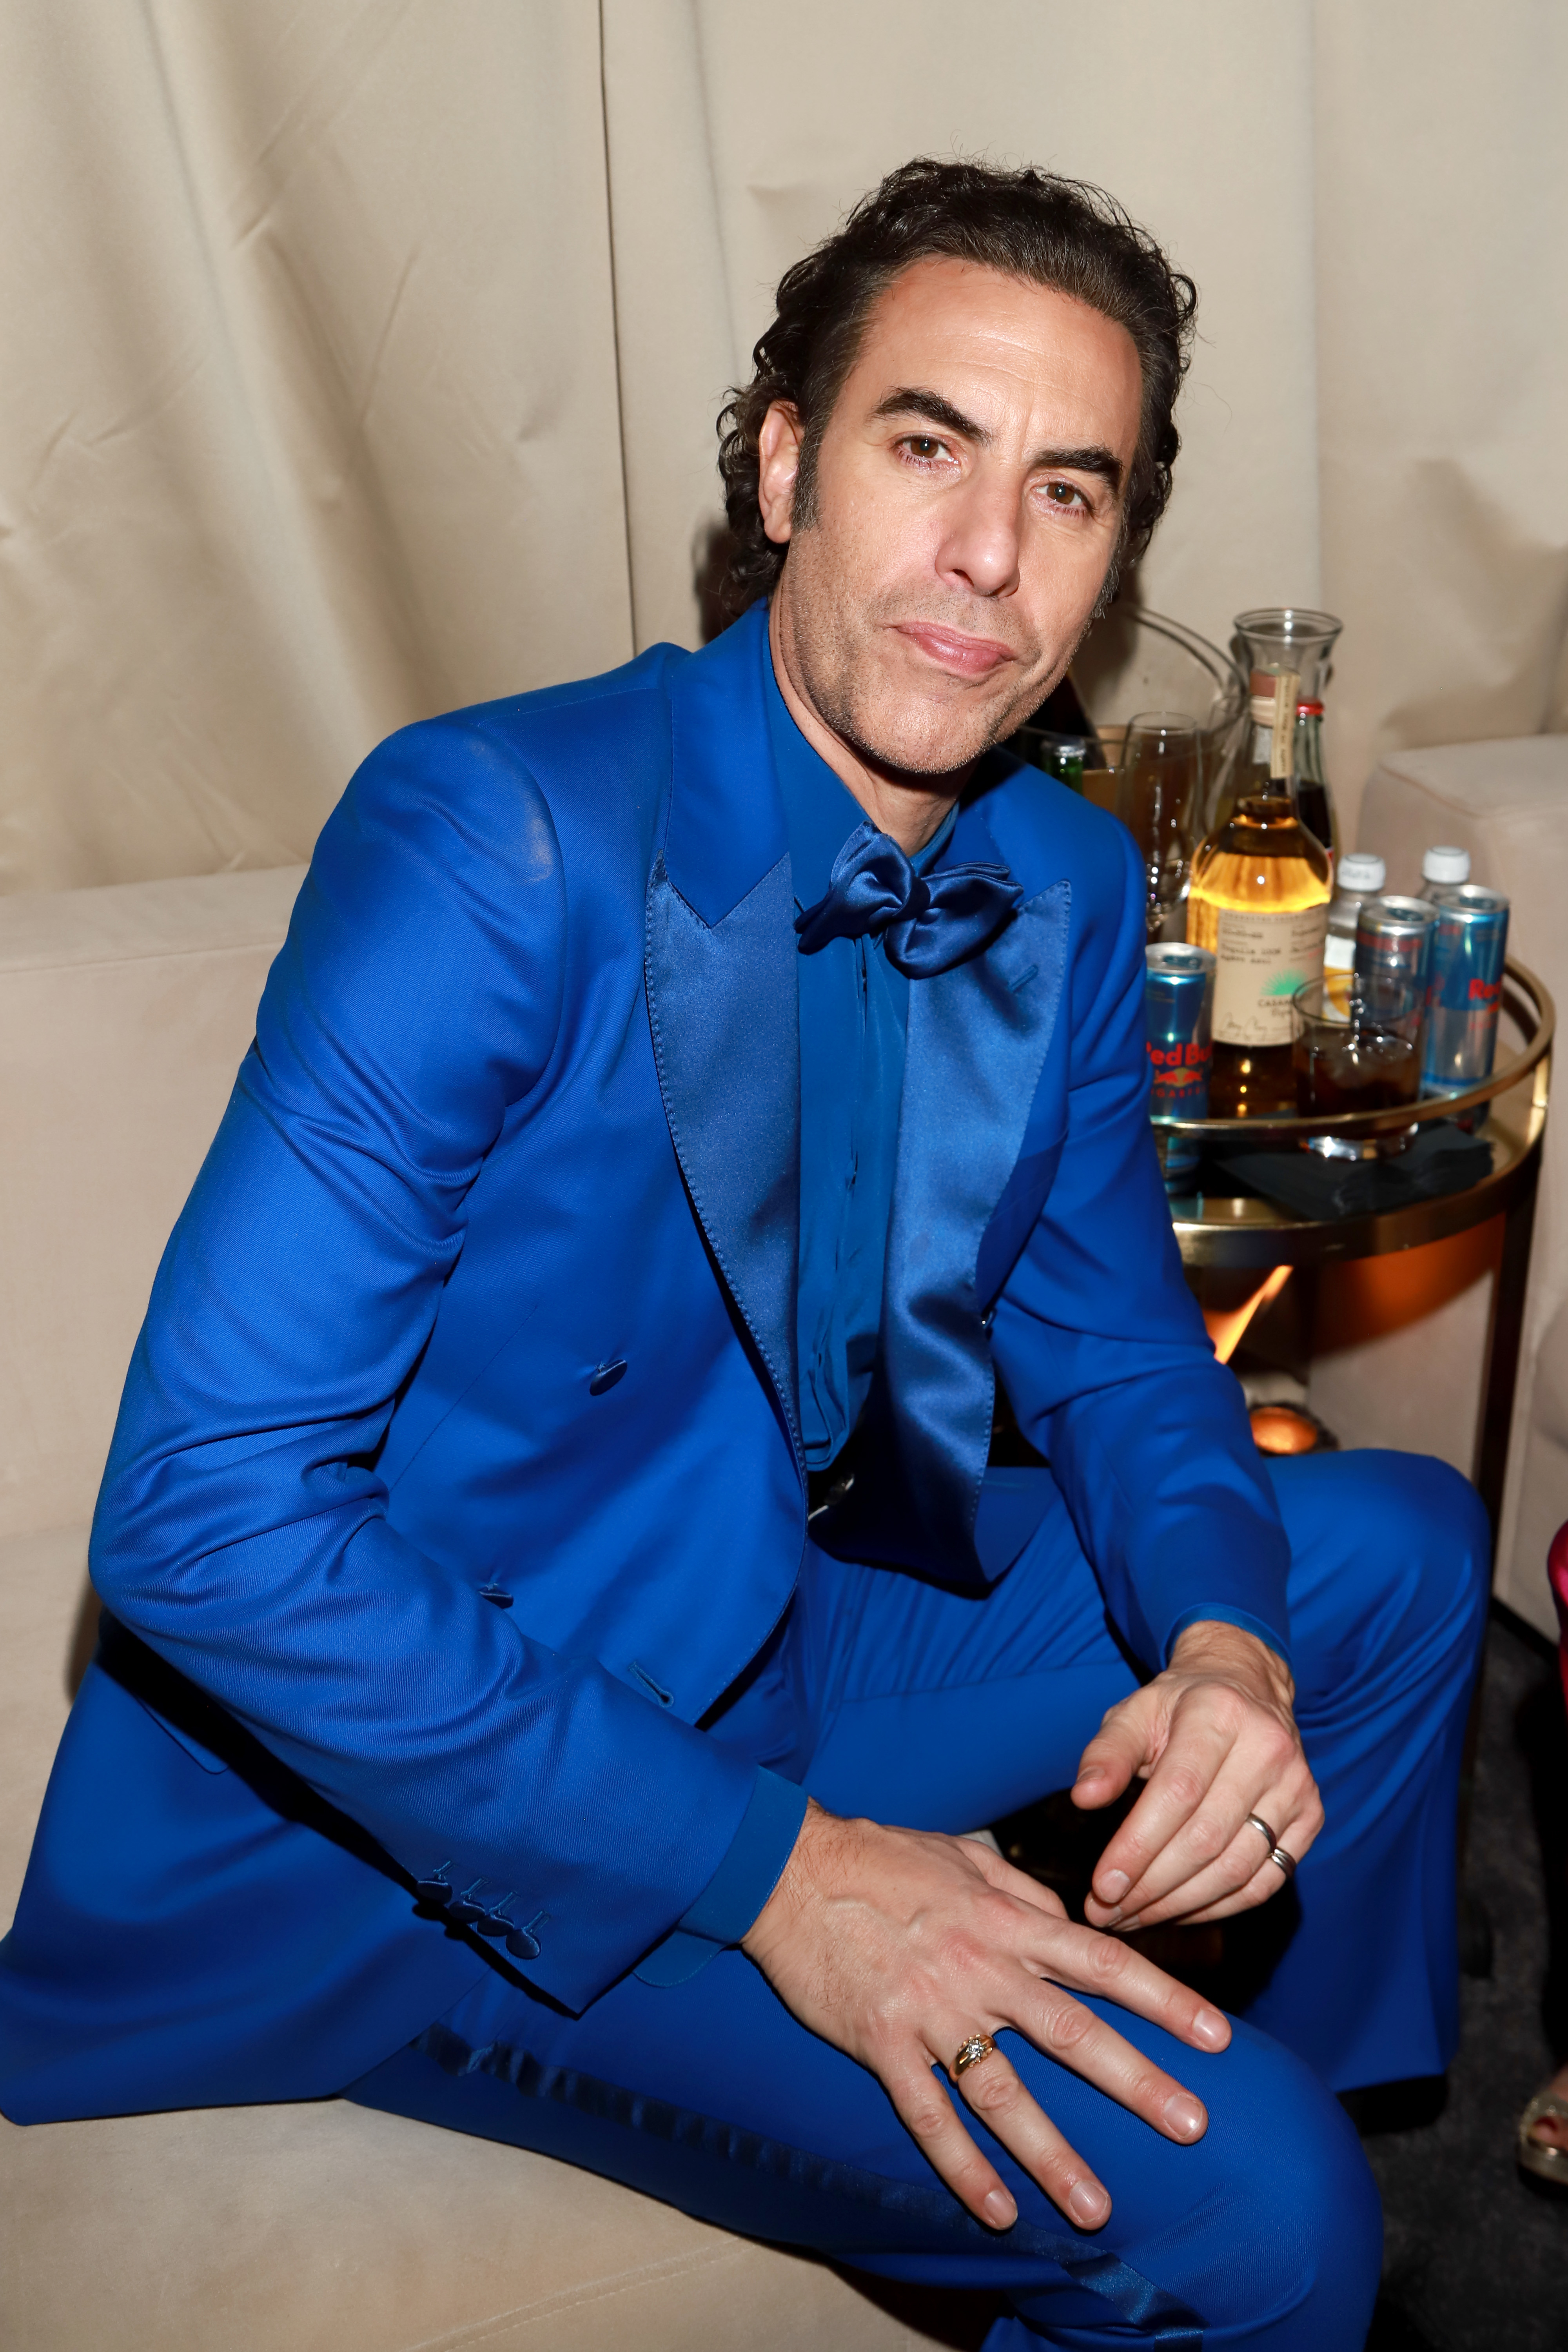 Sacha Baron Cohen in a suit seated with a bow tie at an event